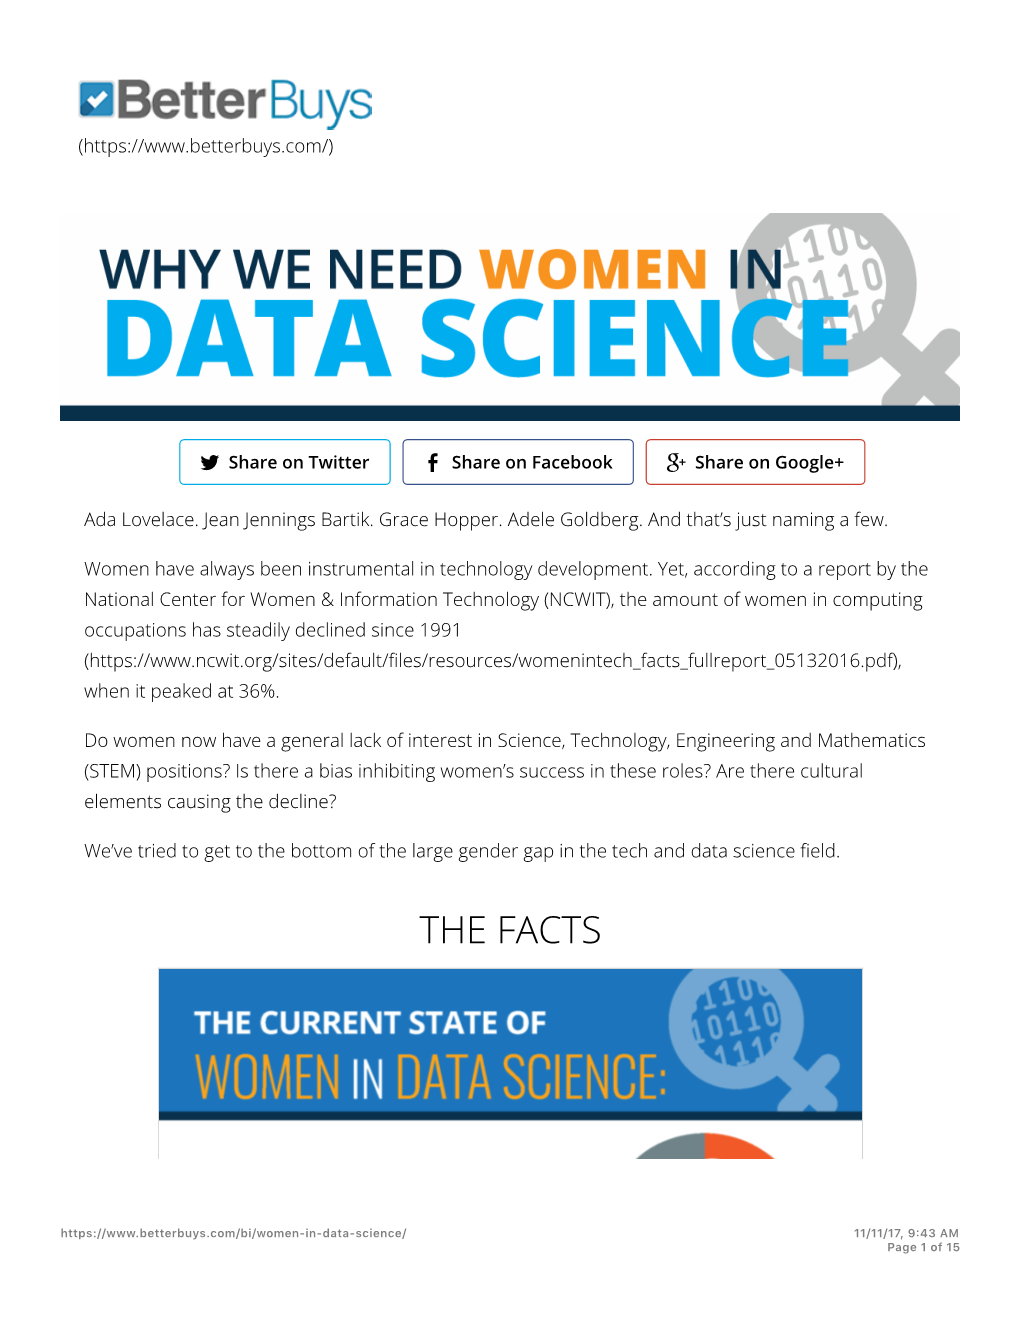 Why We Need Women in Data Science